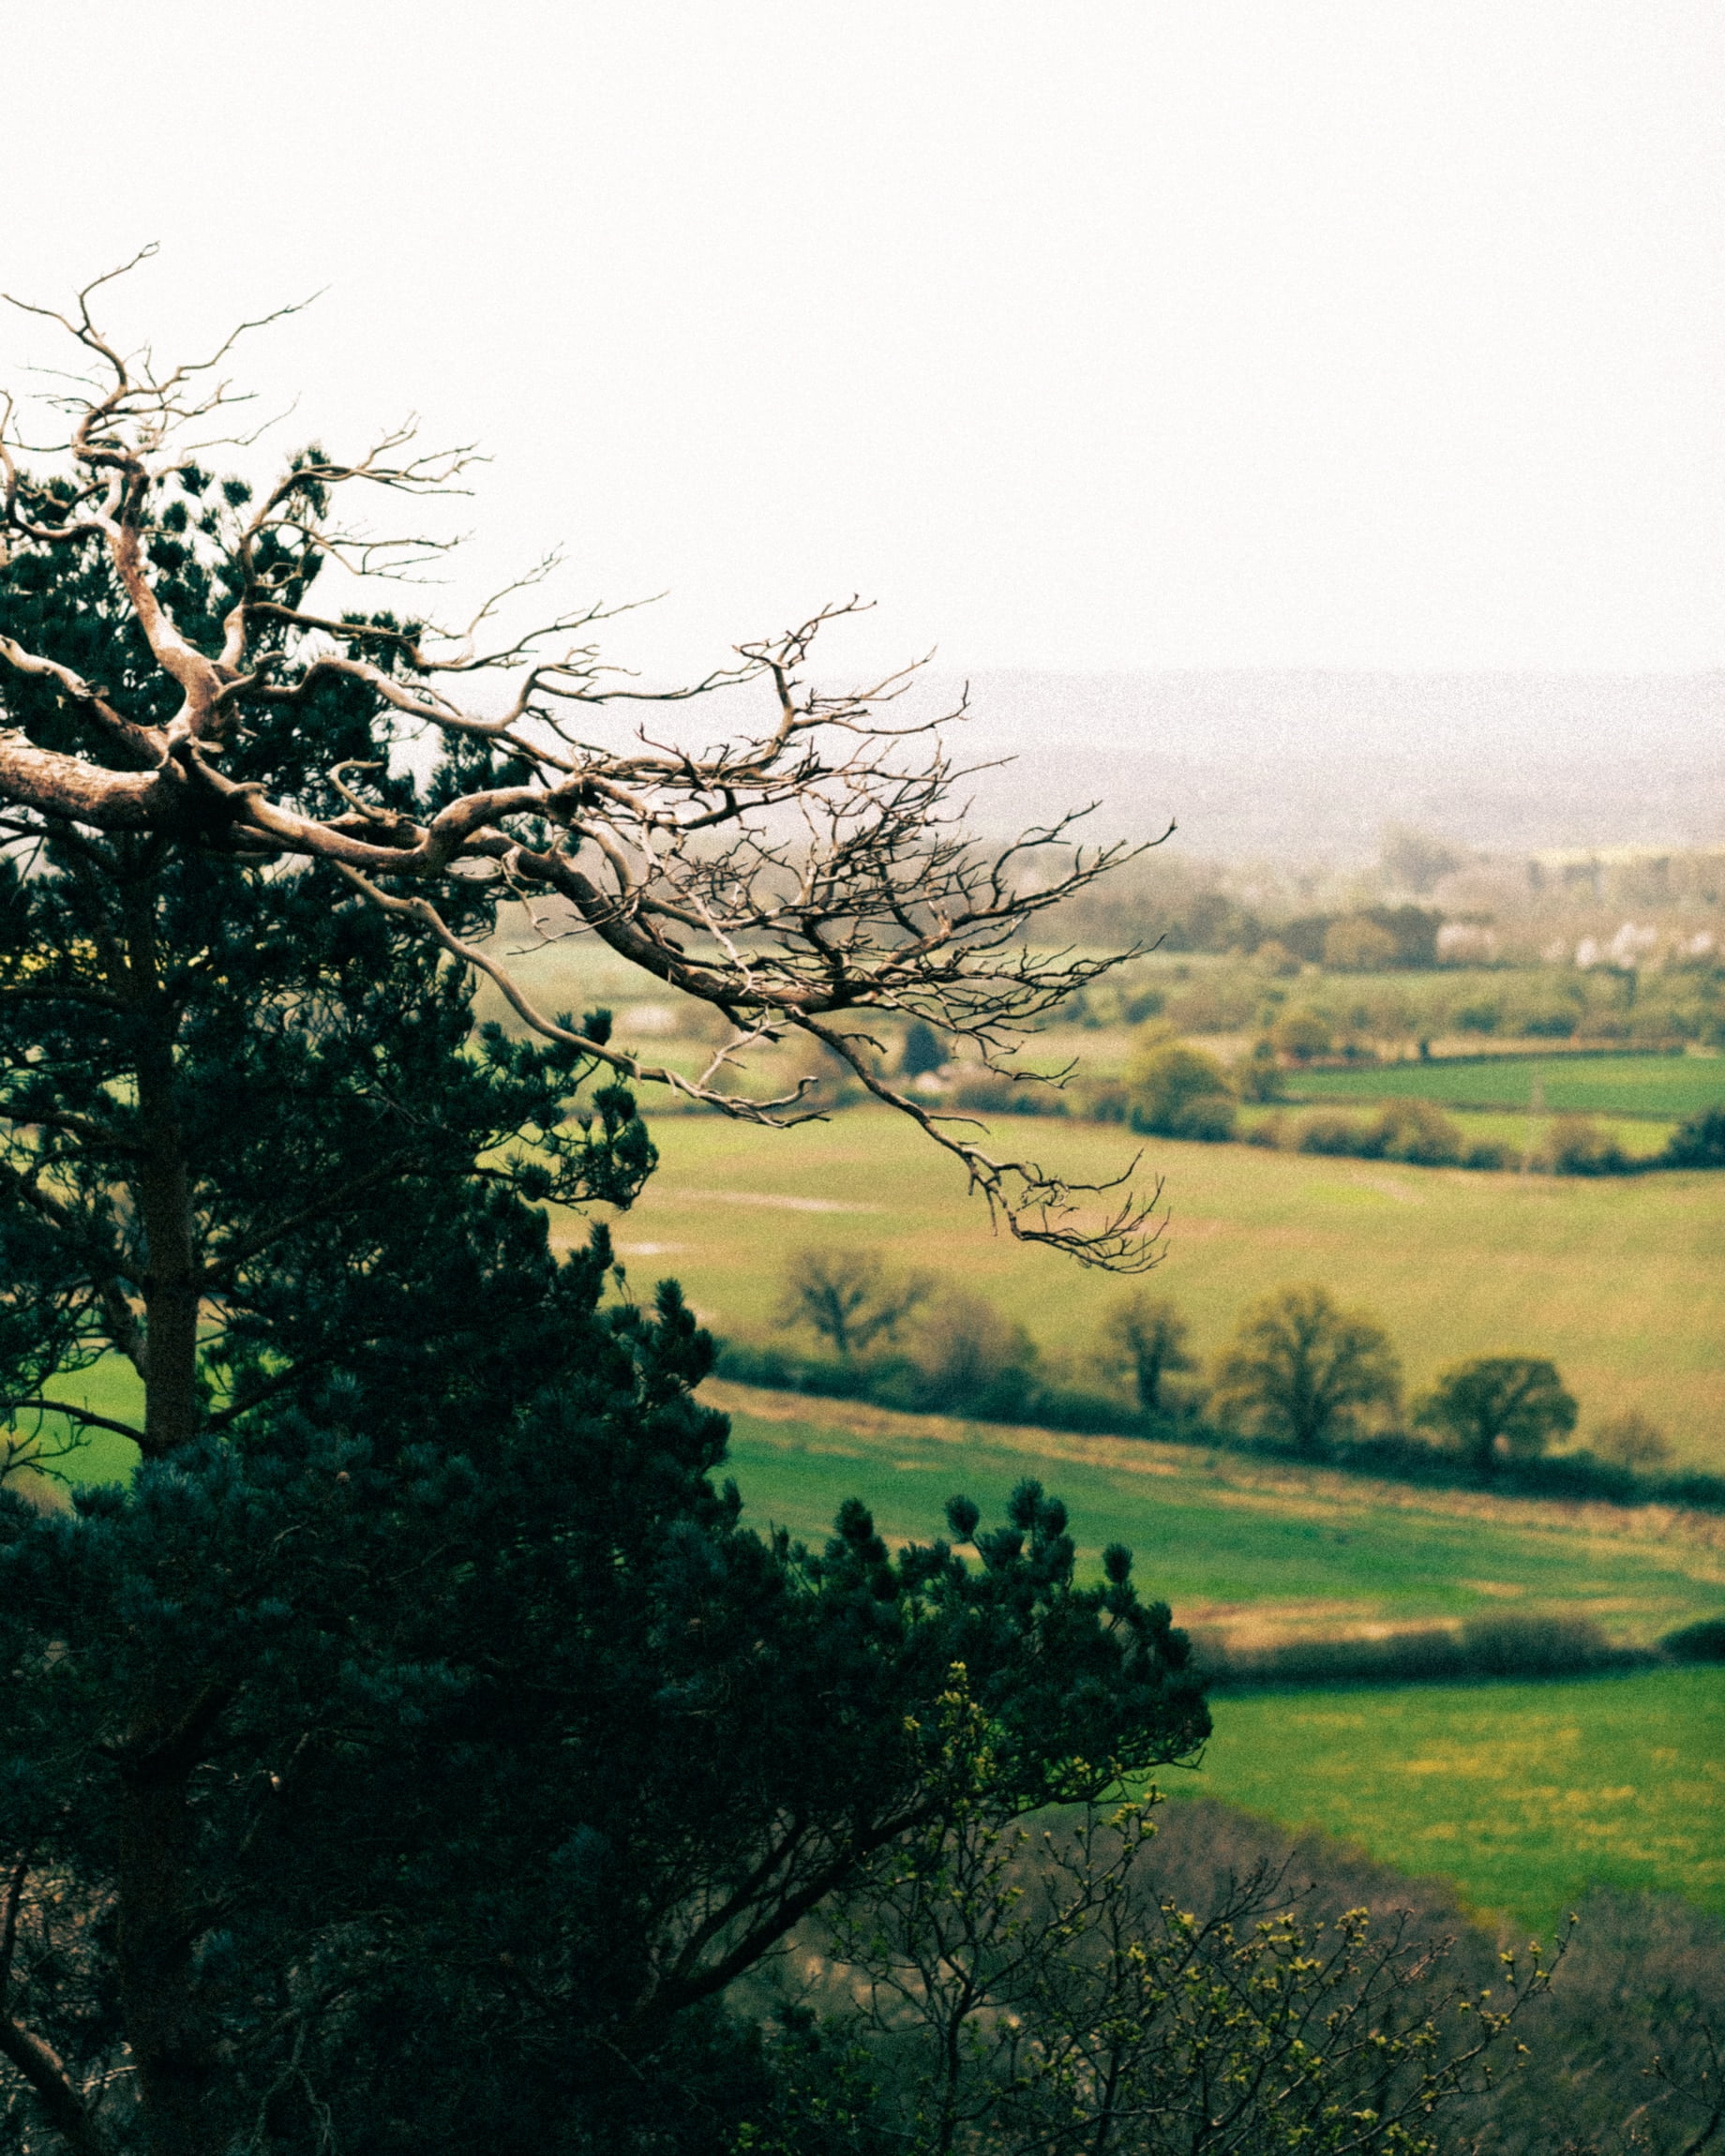 The views from Haughmond Hill, in Shropshire